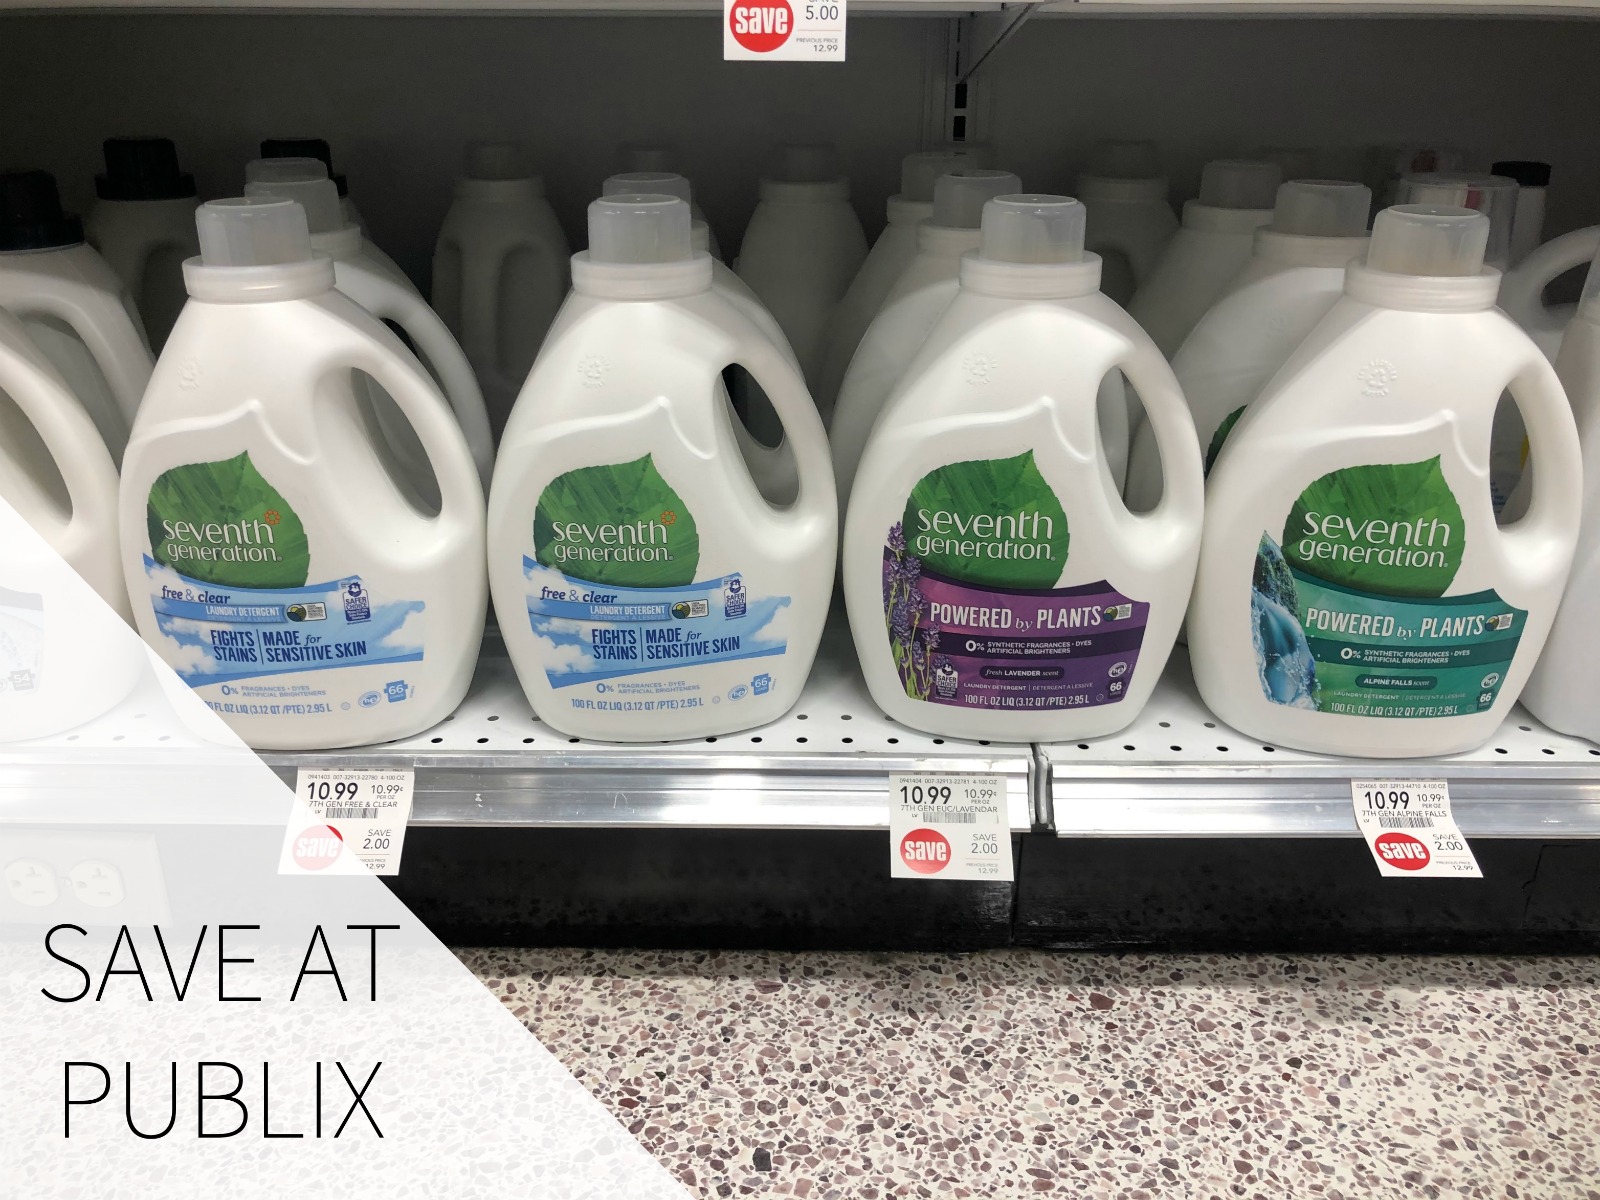 Stock Up On Seventh Generation Laundry Detergent - On Sale Now At Publix on I Heart Publix